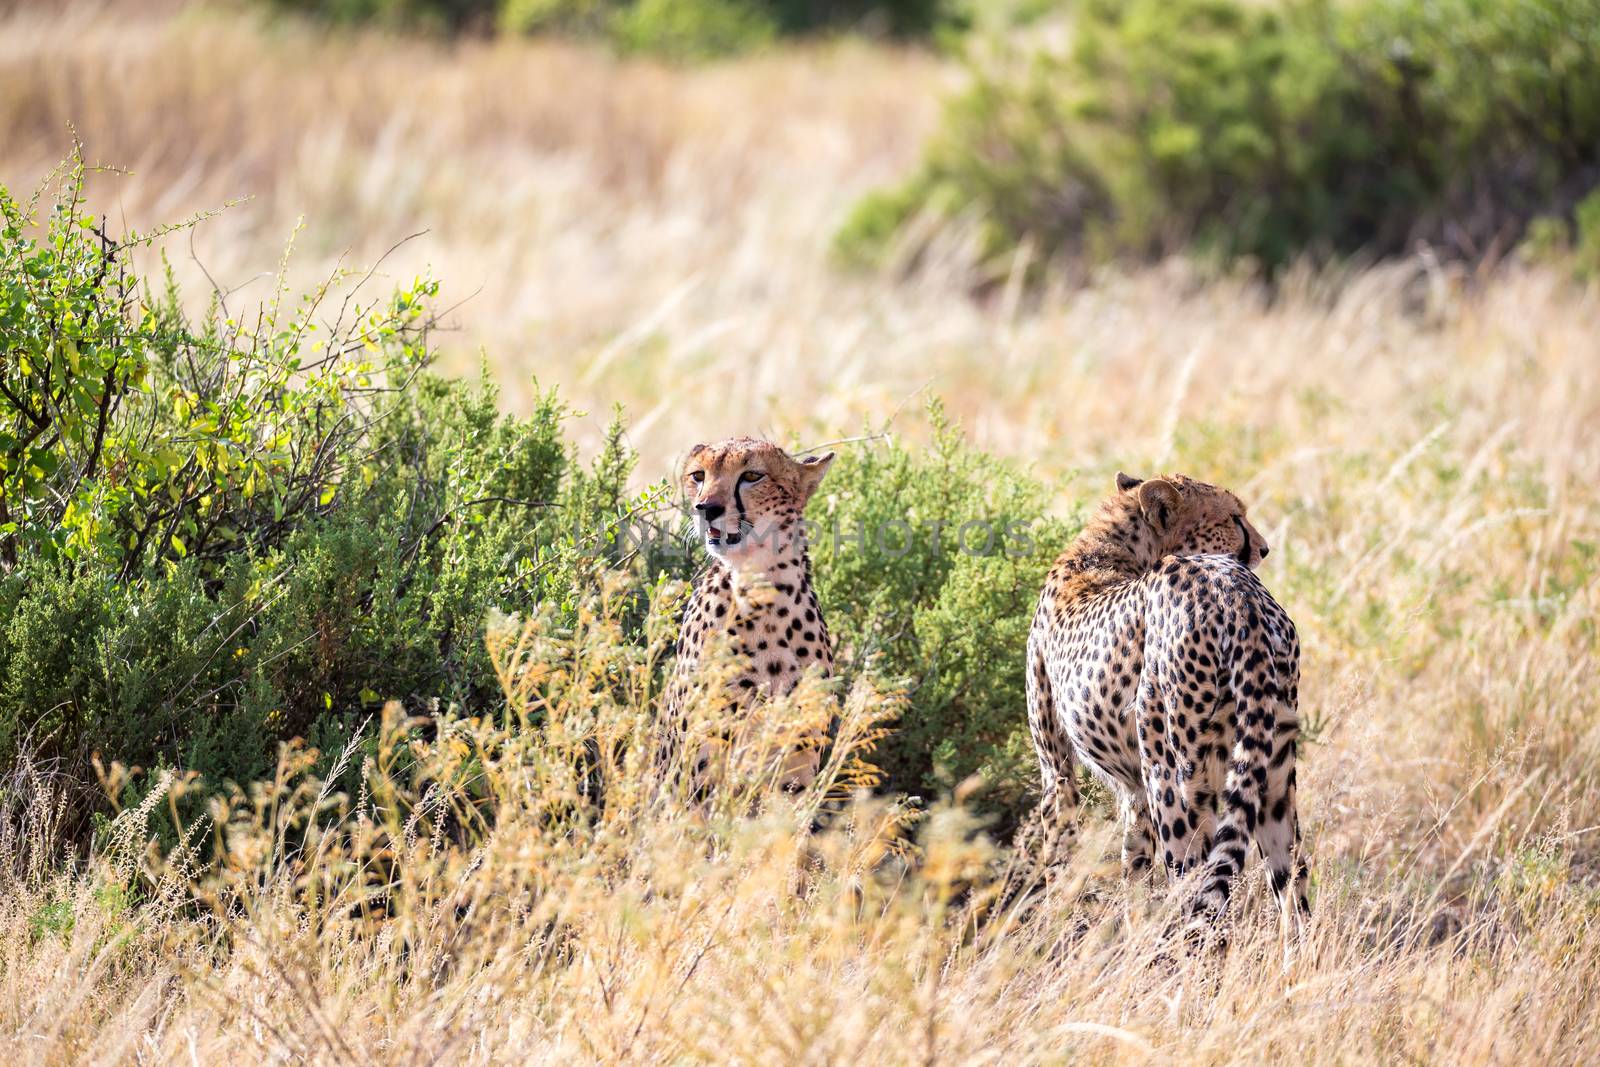 Cheetahs eating in the middle of the grass by 25ehaag6